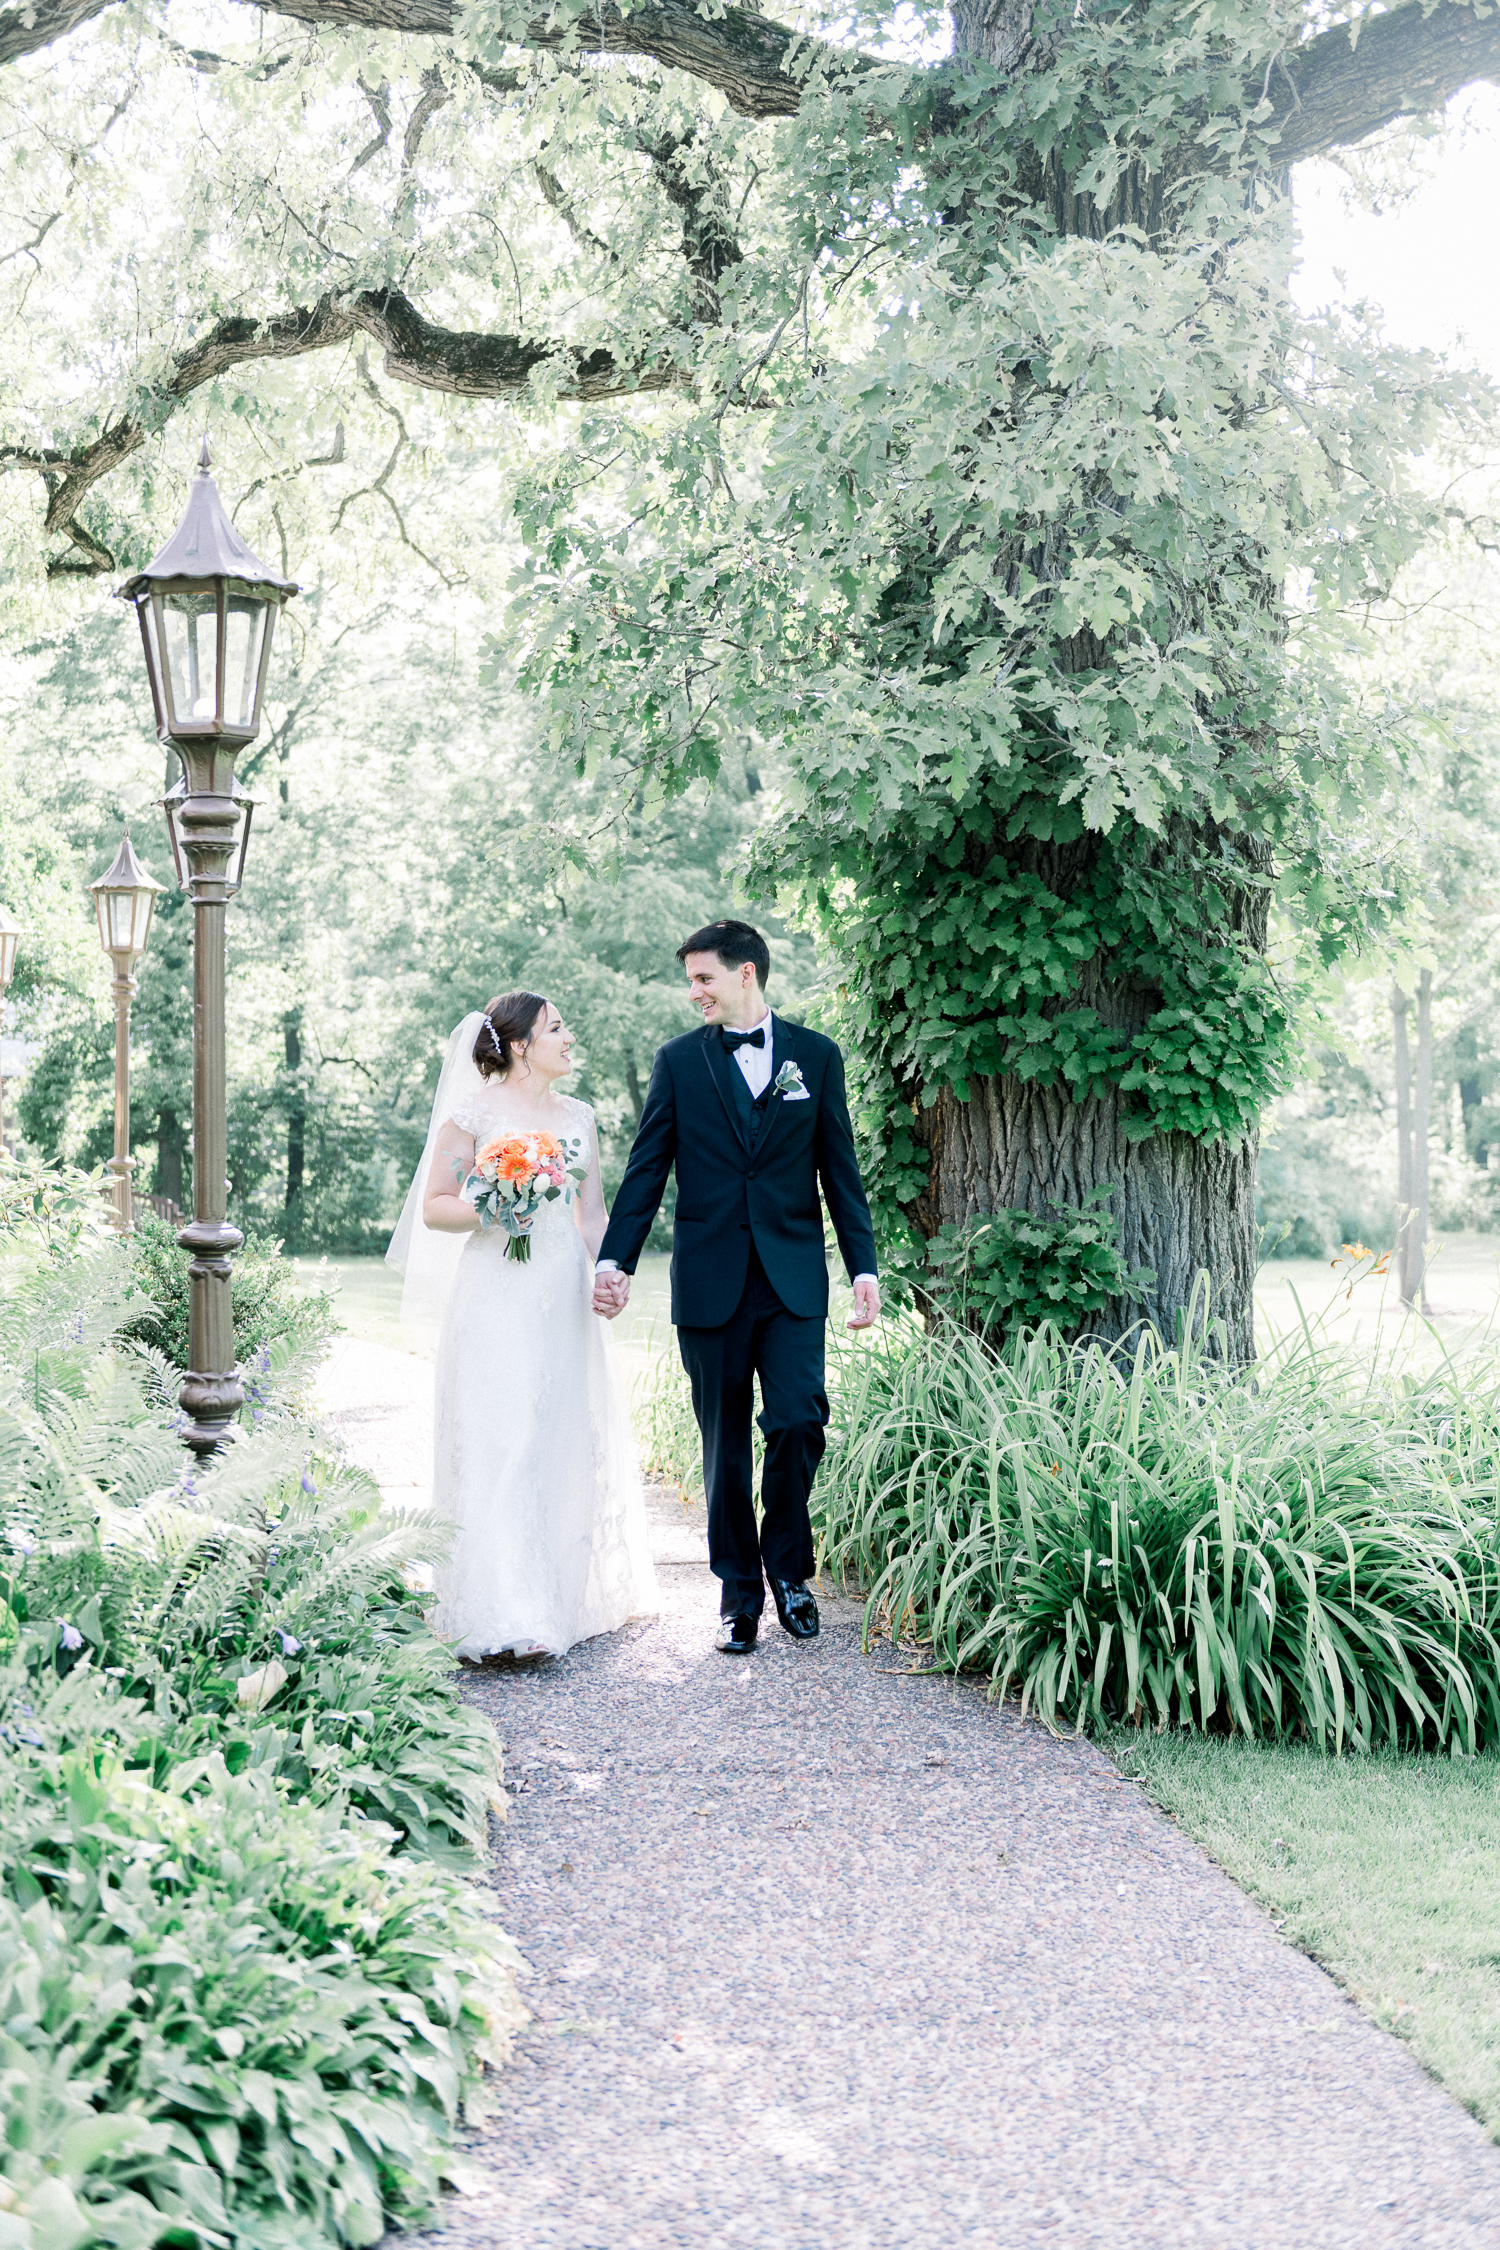 Bride and groom walk along a path surrounded by greeneries